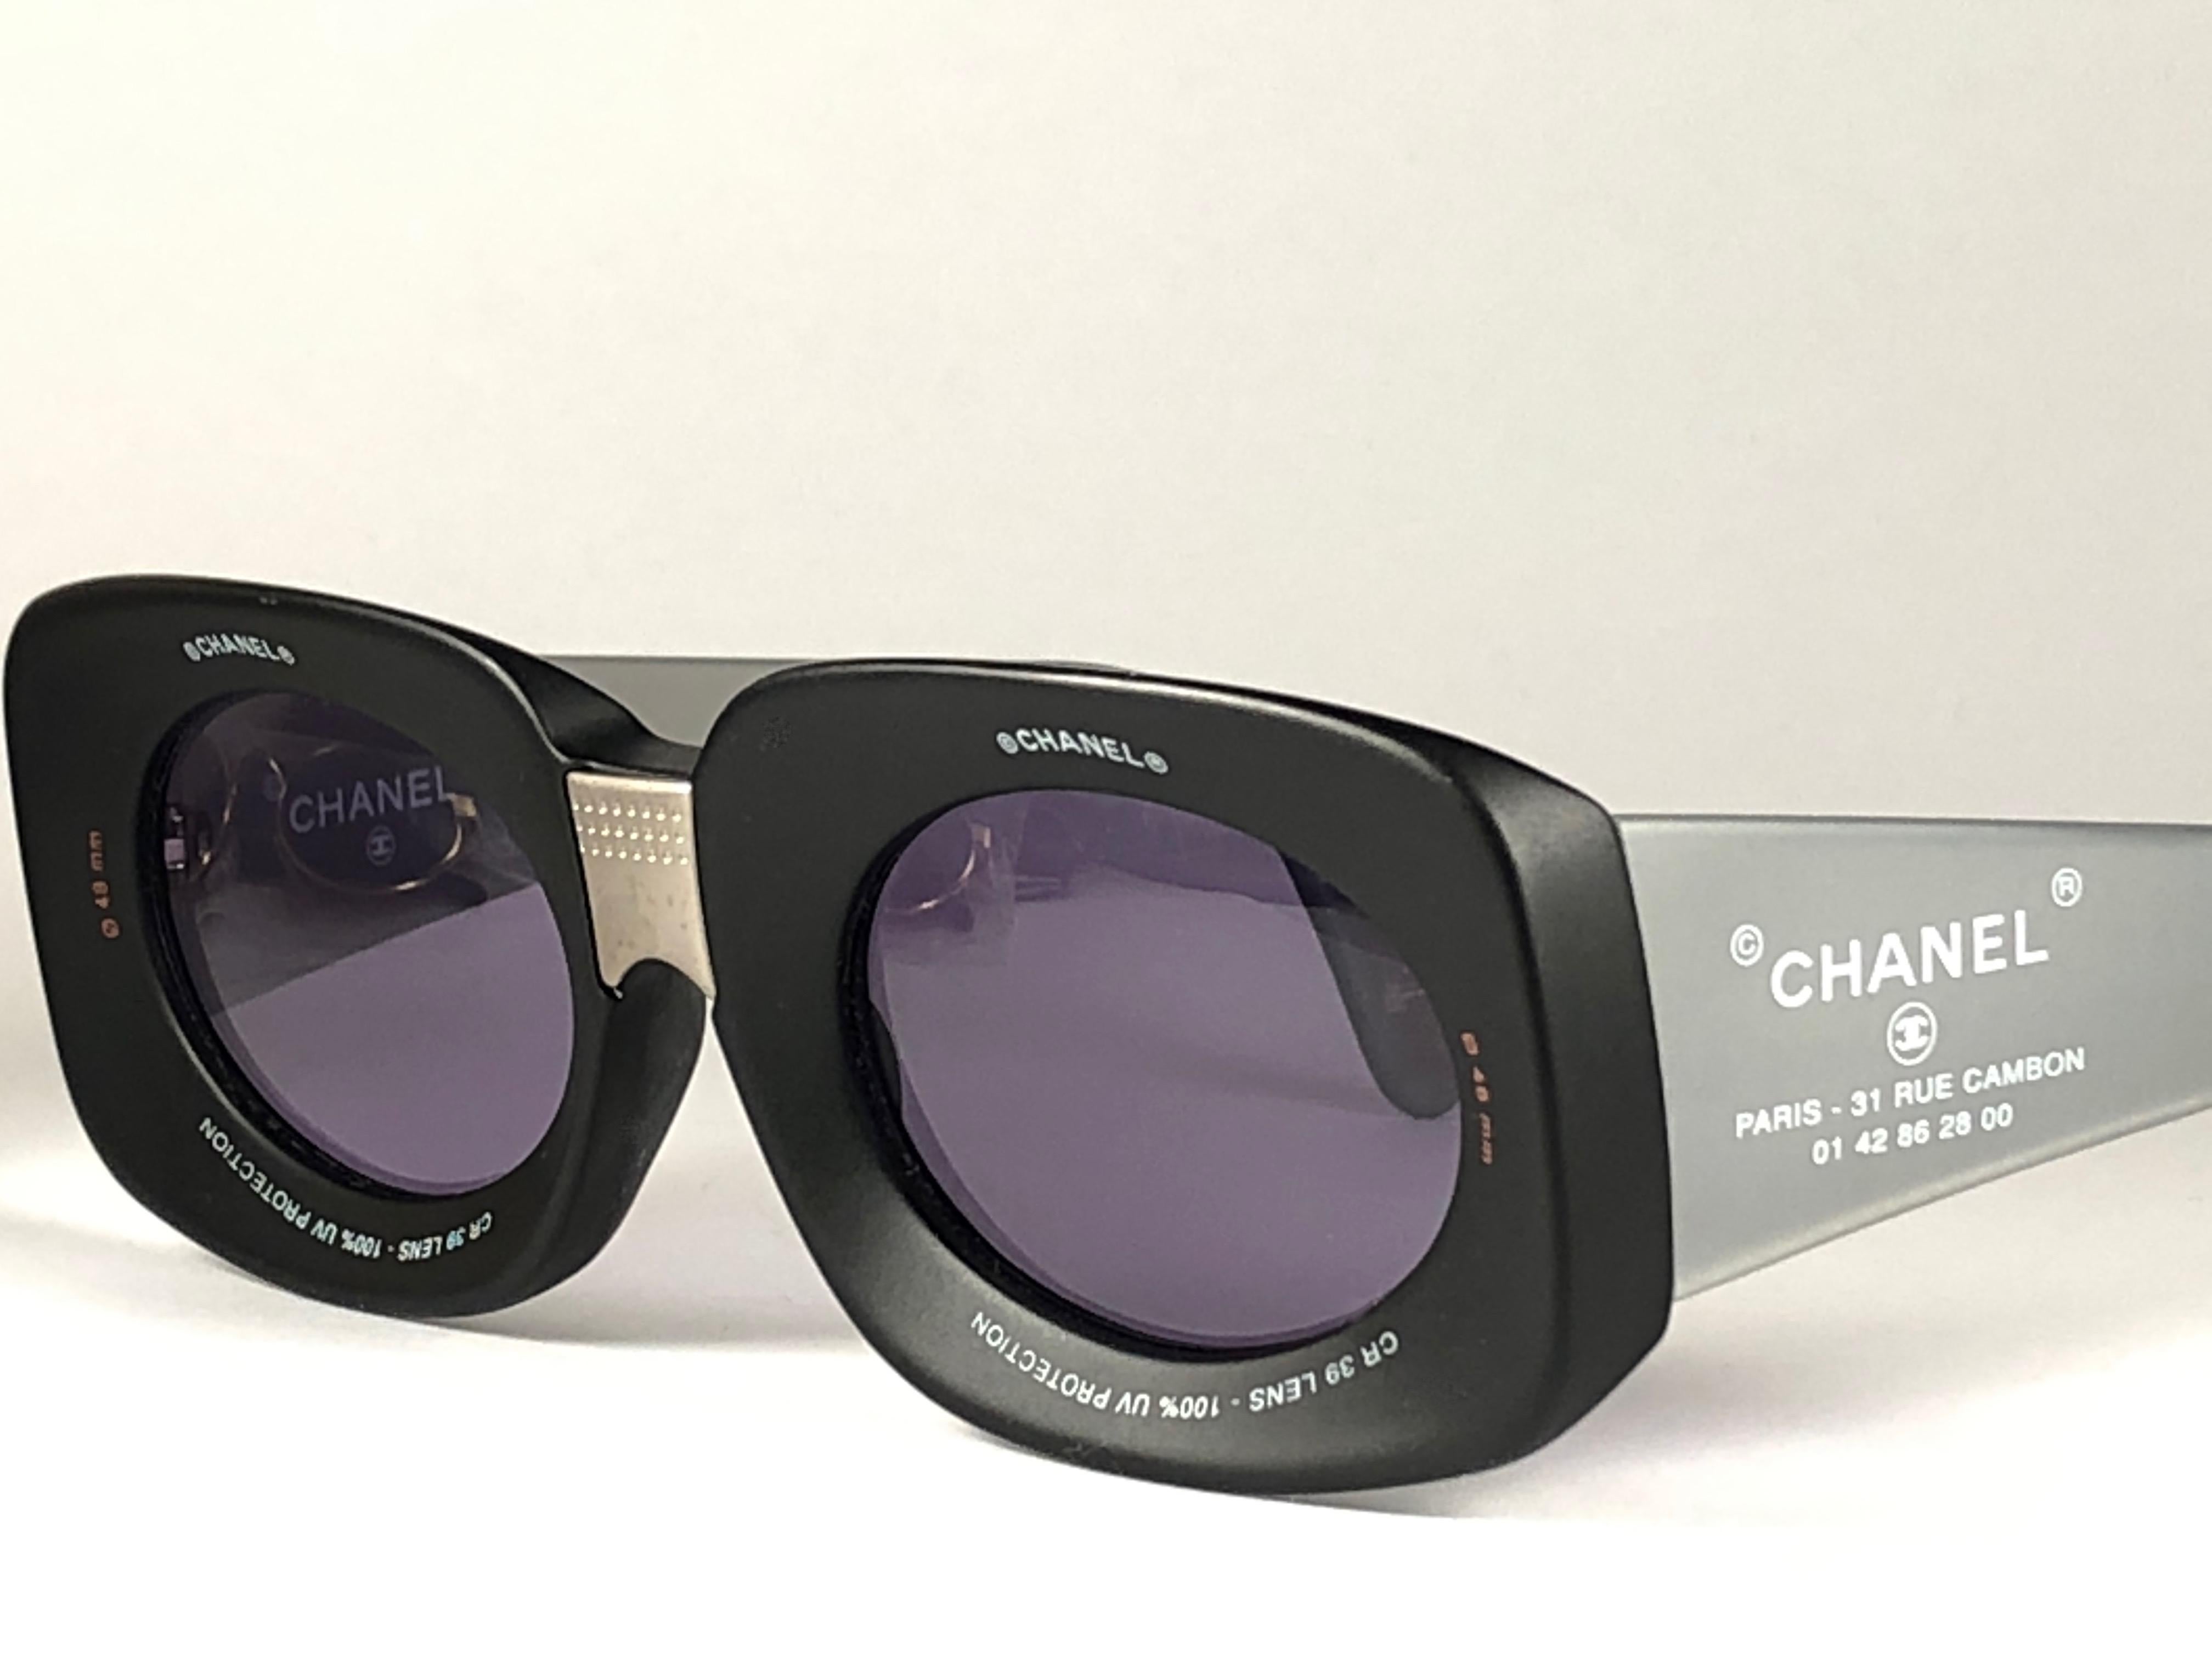 Chanel Vintage Camera Lens Black & Grey Sunglasses Made in Italy Collector Item 1